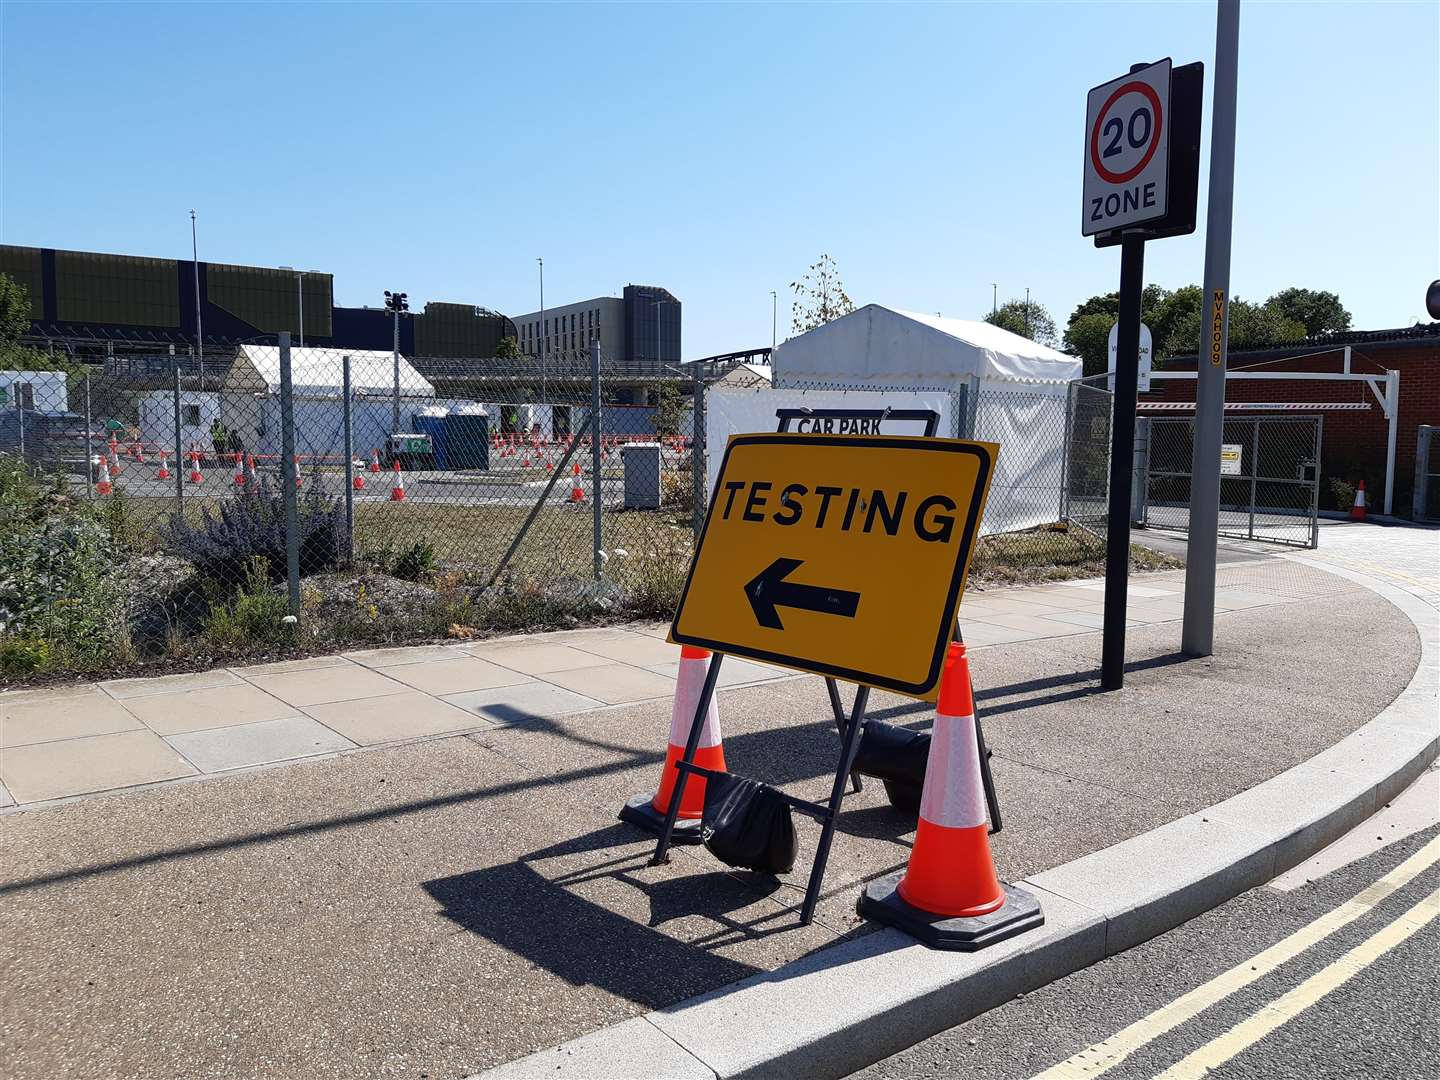 A coronavirus test centre opened in Ashford in June, with other towns following across the county.